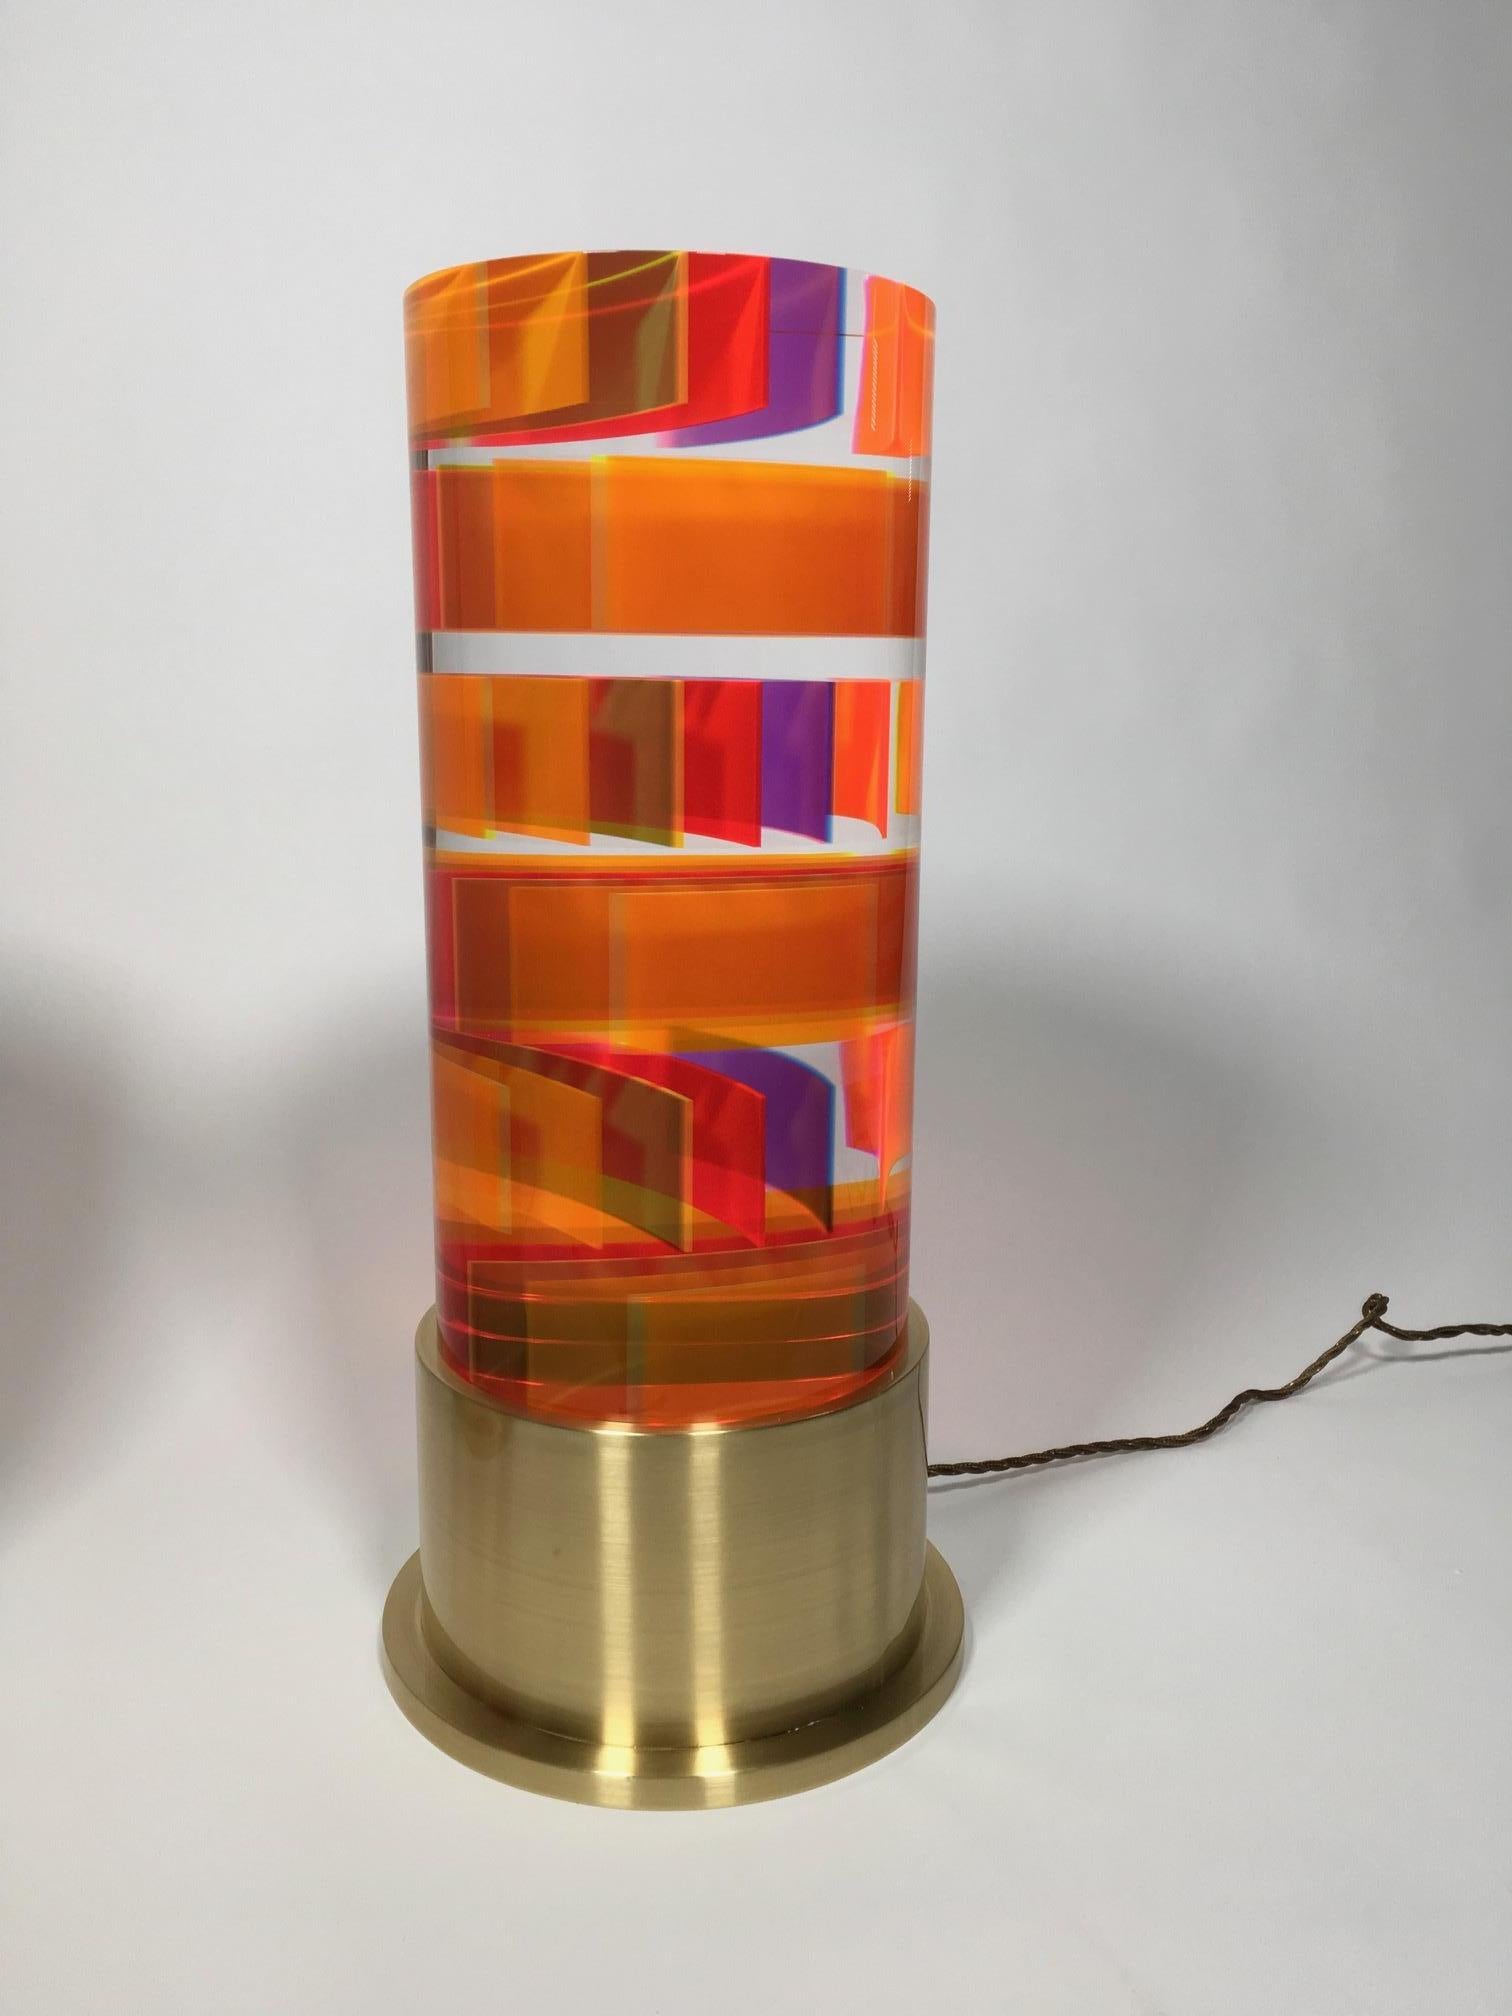 Lamp plexiglass of different colors with the brass base designed and produced by Studio Superego. 

Biography
Superego editions was born in 2006, performing a constant activity of research in decorative arts by offering both contemporary and vintage